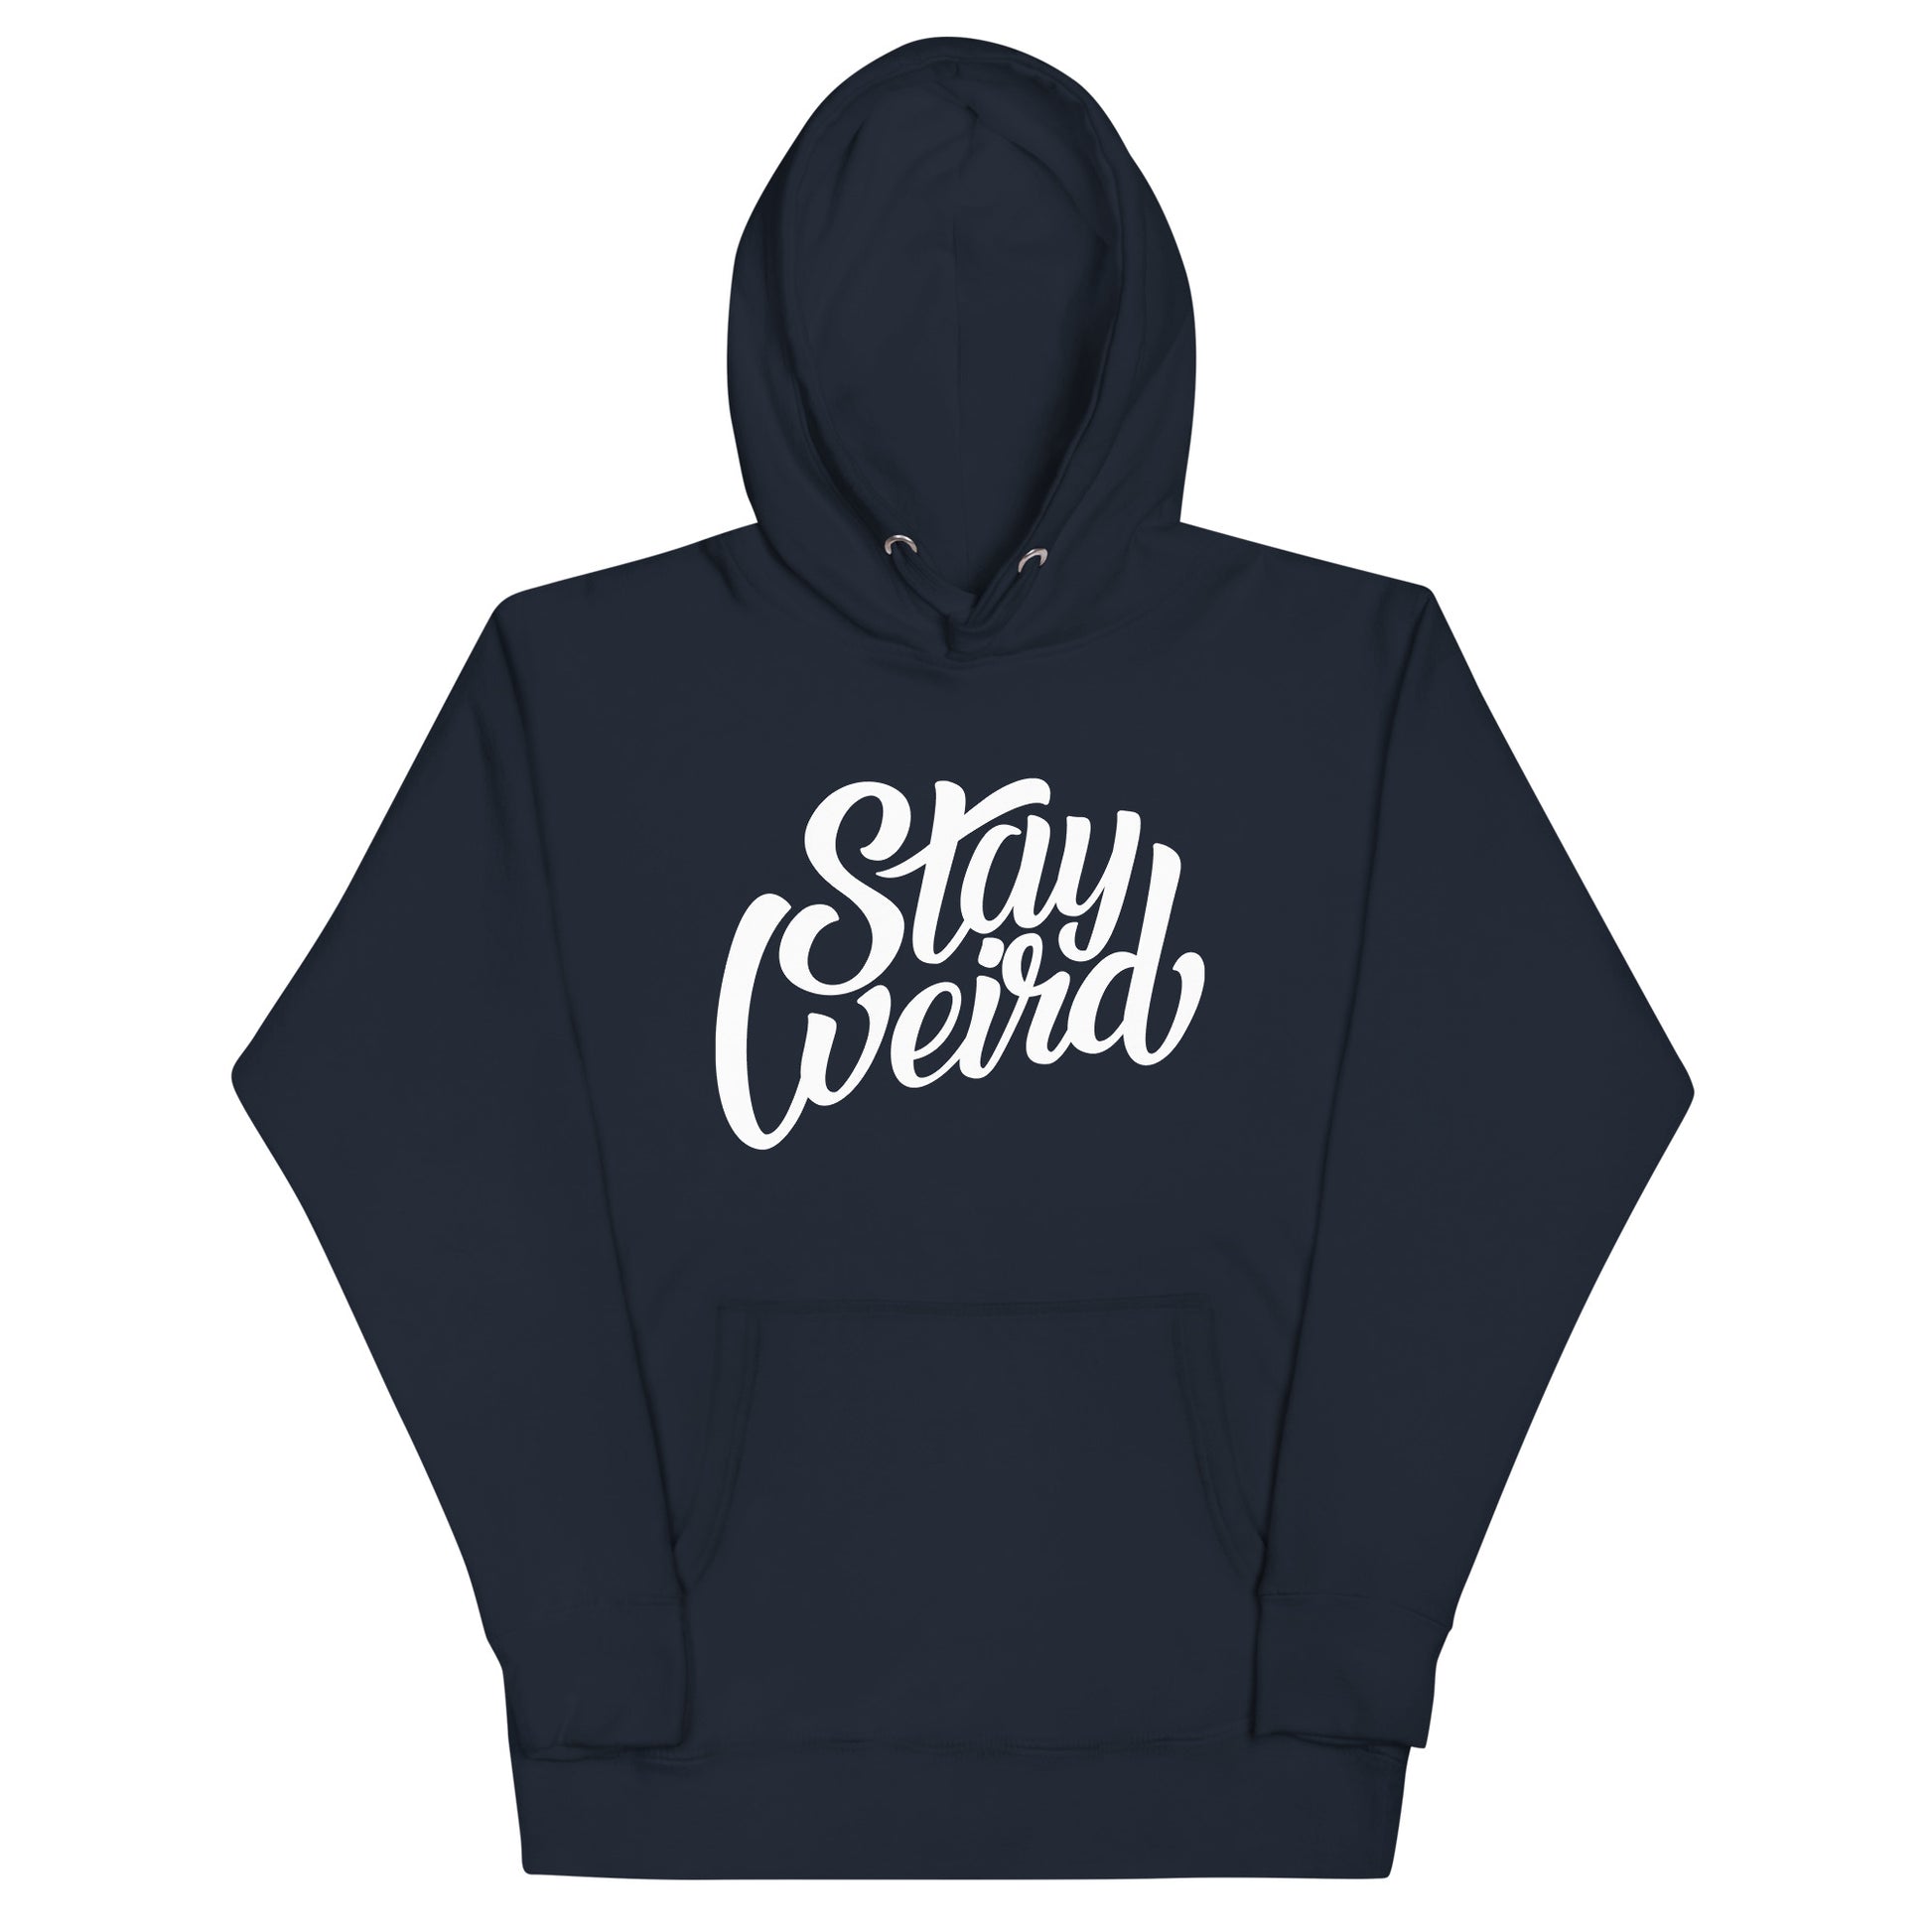 hoodie Stay Weird navy by B.Different Clothing independent streetwear brand inspired by street art graffiti